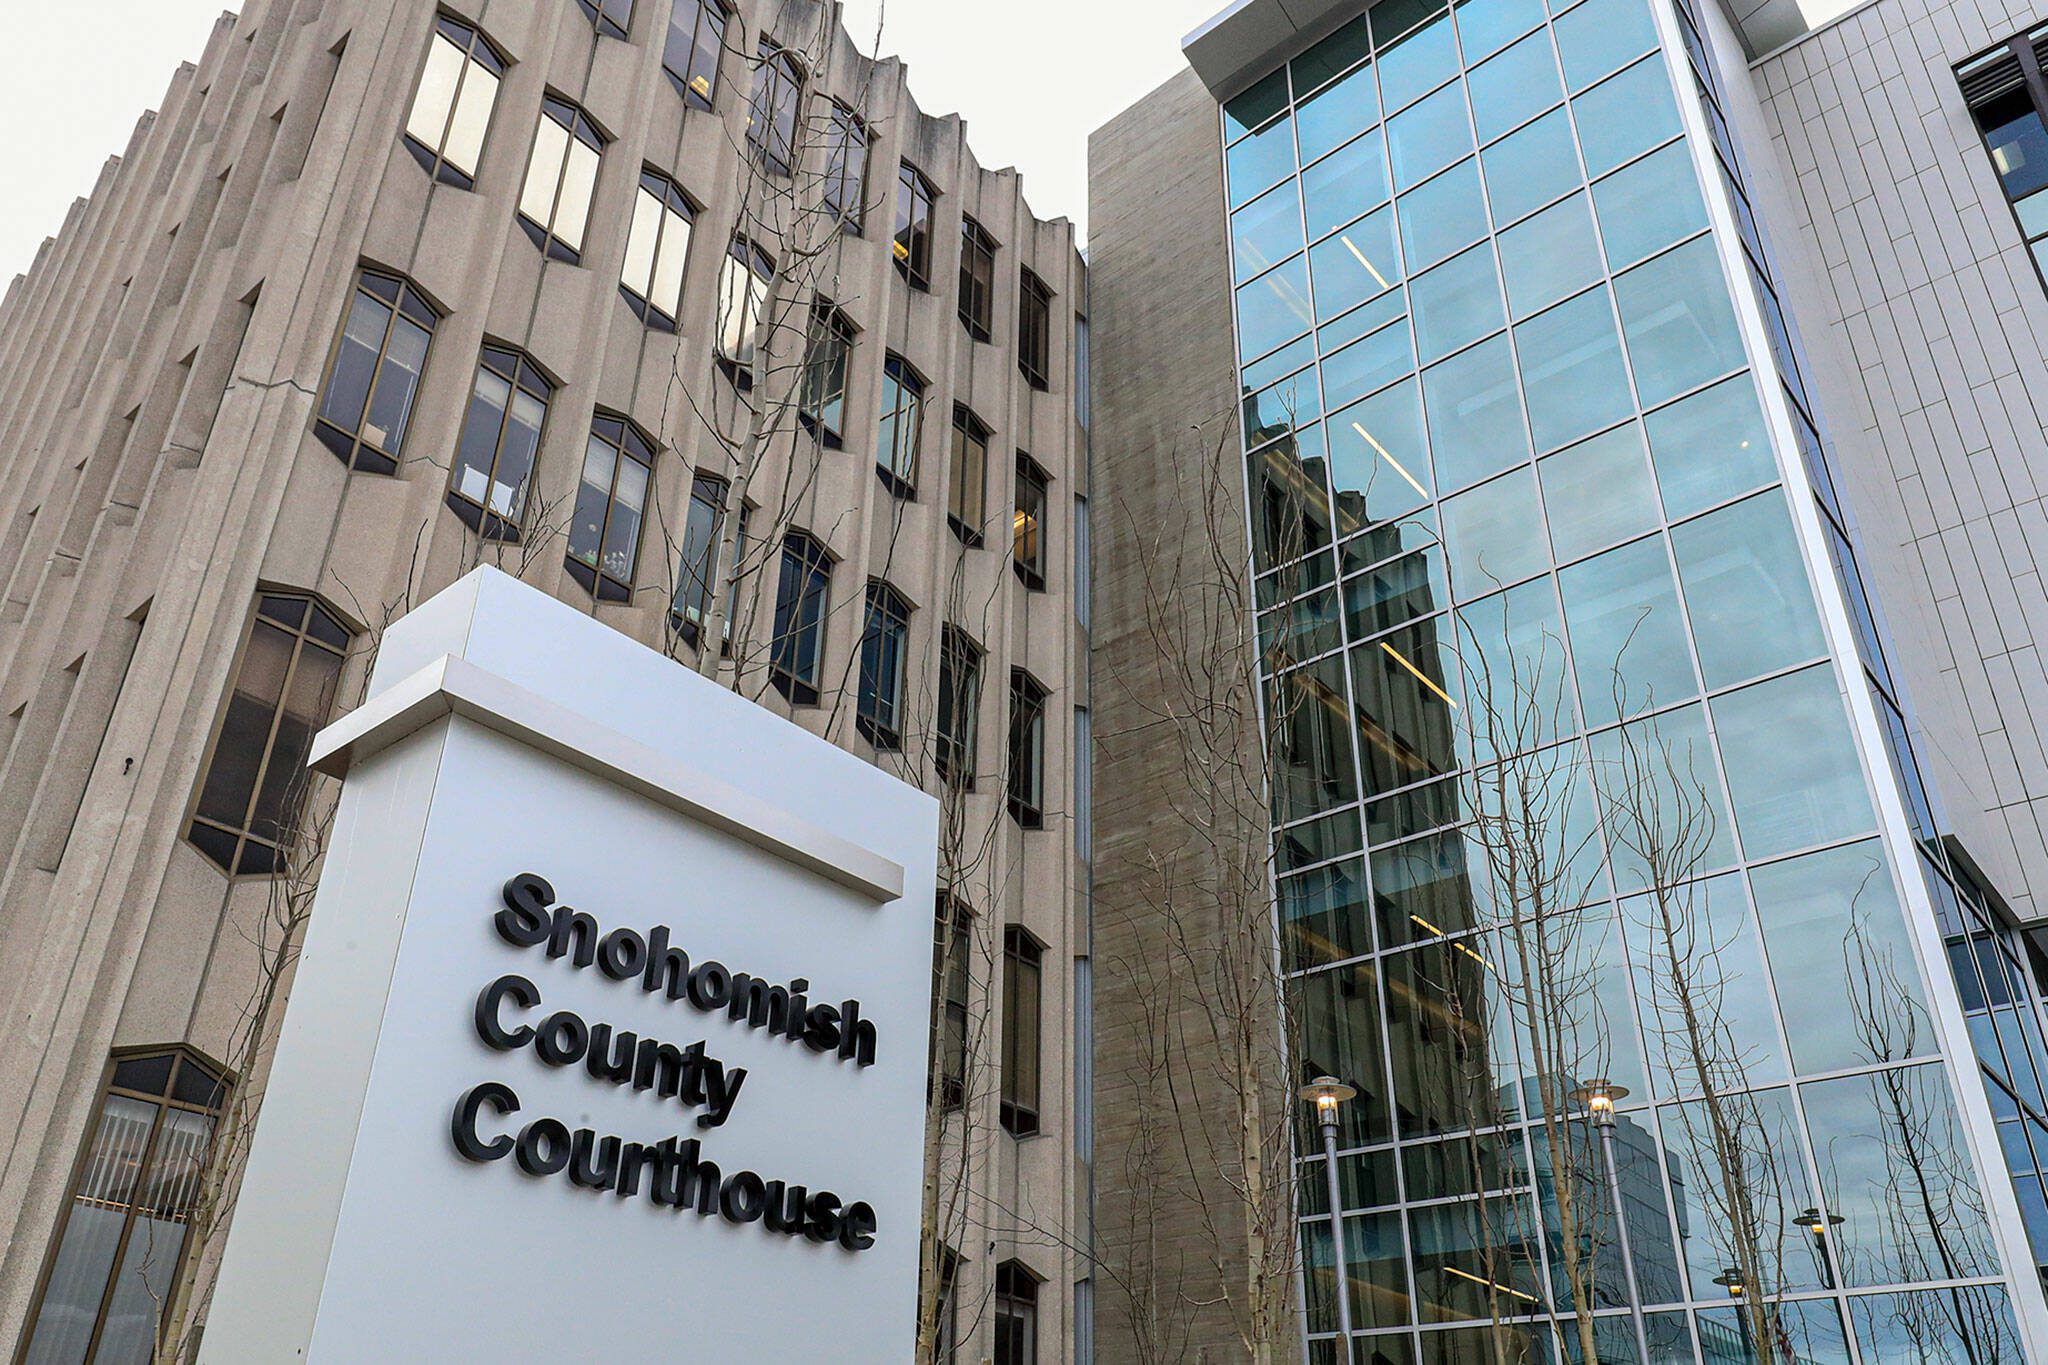 Snohomish County Superior Courthouse in Everett, Washington on February 8, 2022. (Kevin Clark / The Herald)